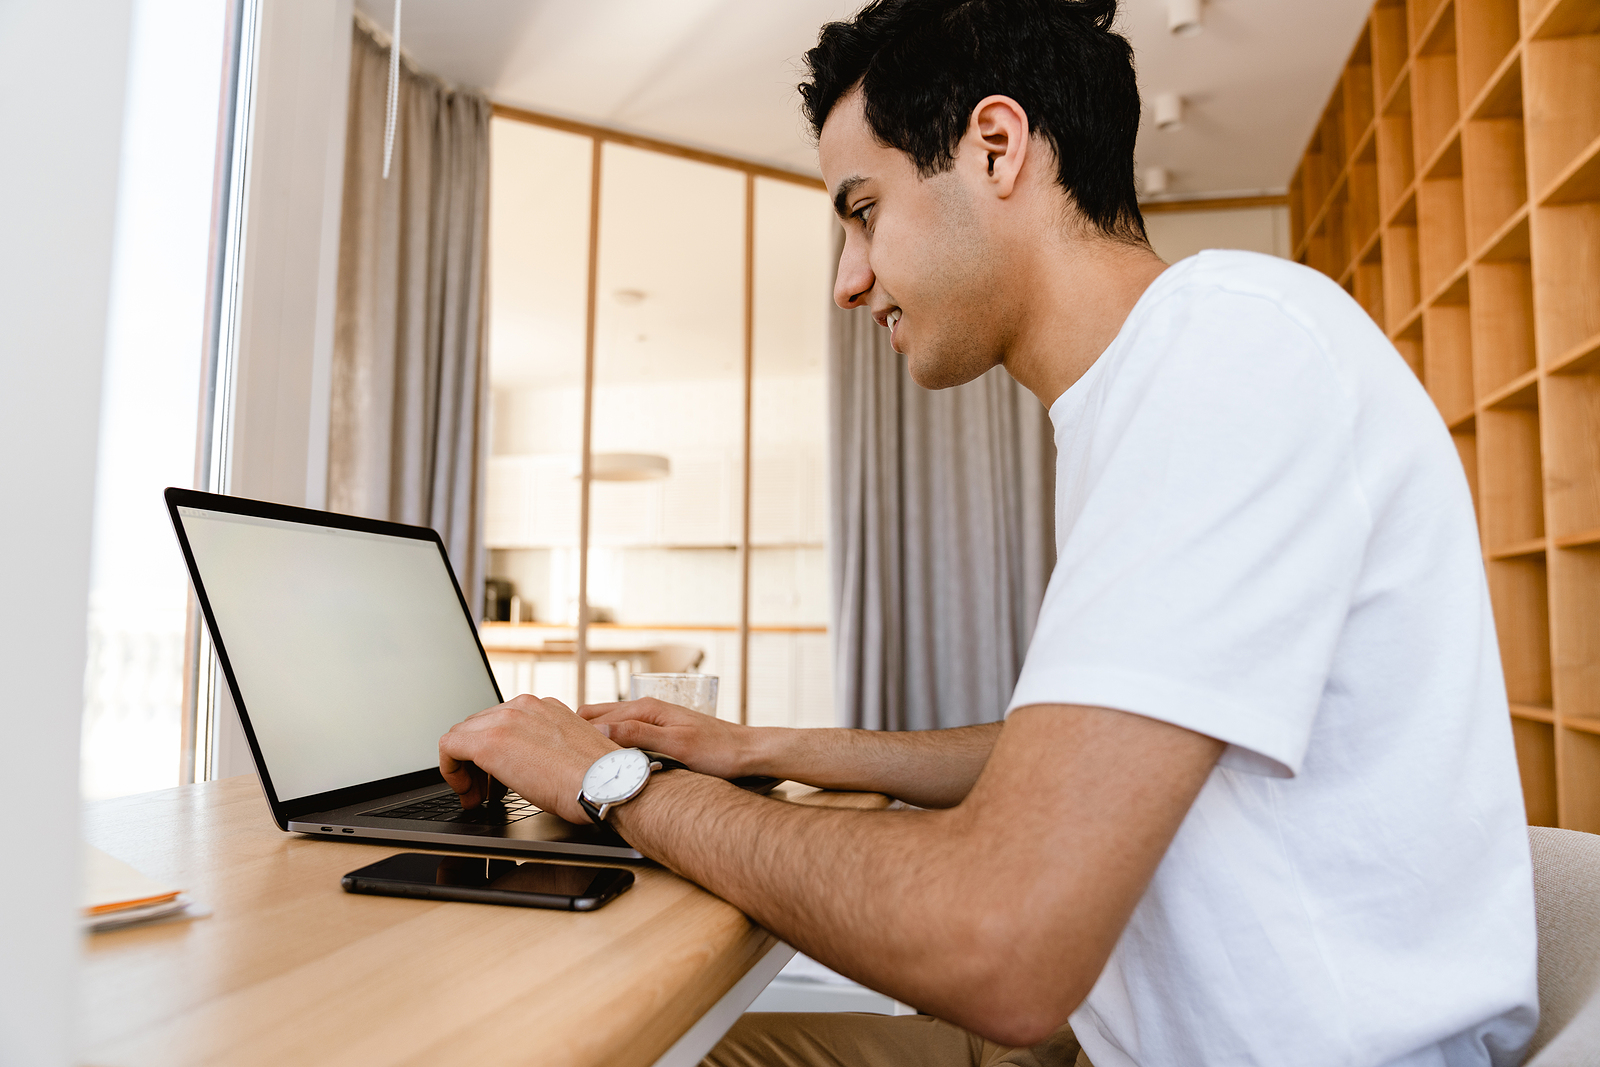 A young man reviews personal loan requirements online using a laptop computer.